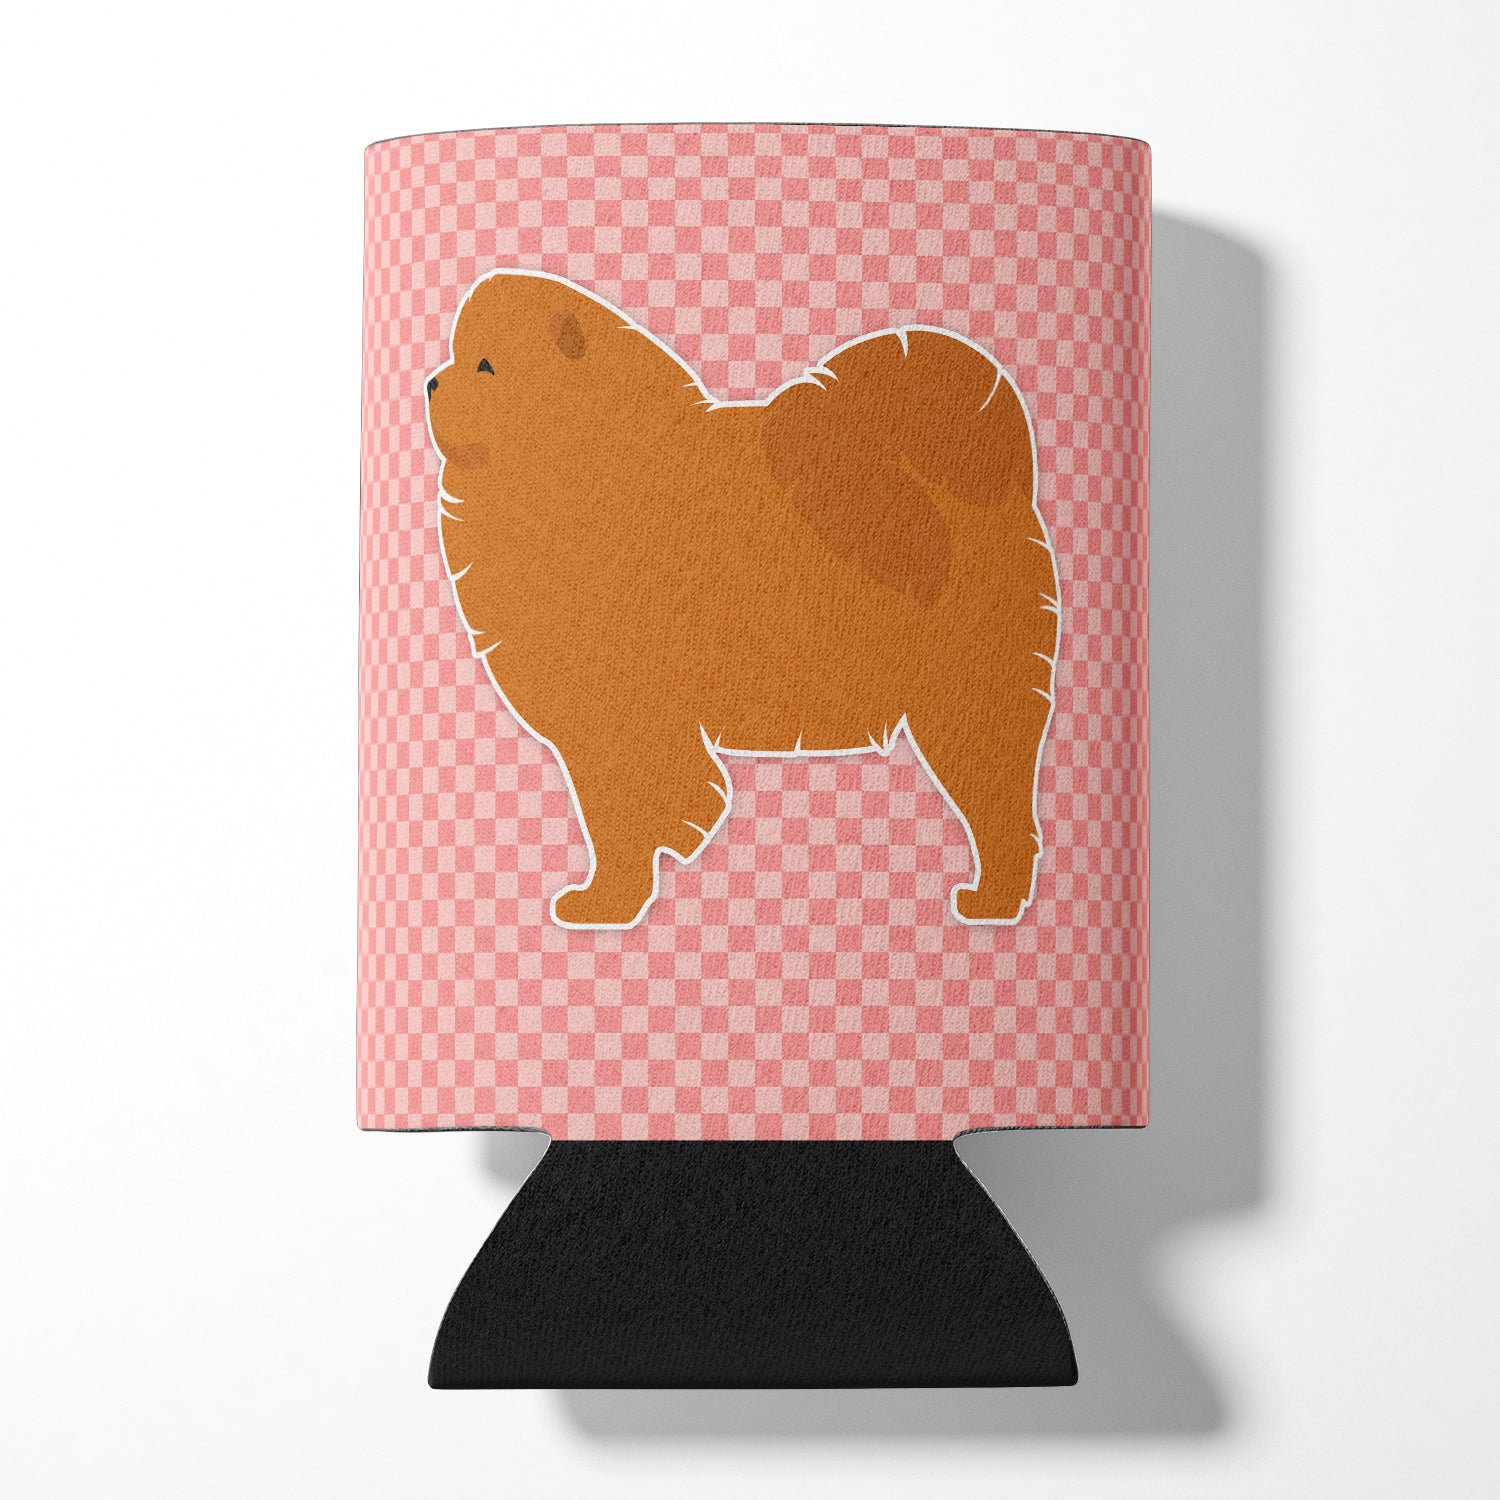 Chow Chow Checkerboard Pink Can or Bottle Hugger BB3651CC  the-store.com.